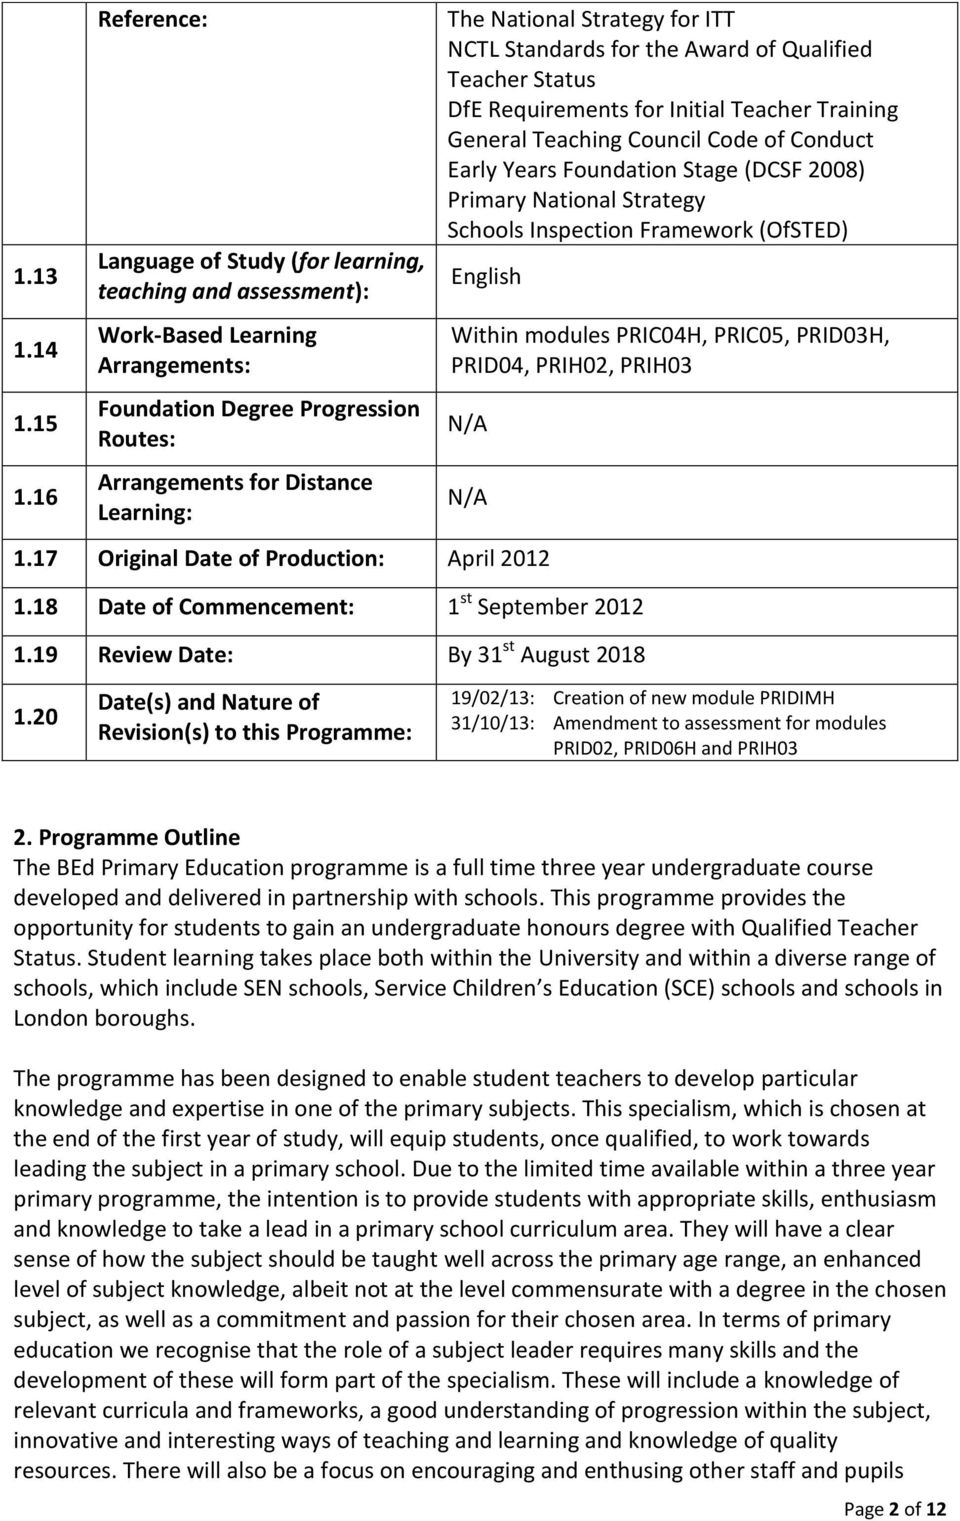 Strategy for ITT NCTL Standards for the Award of Qualified Teacher Status DfE Requirements for Initial Teacher Training General Teaching Council Code of Conduct Early Years Foundation Stage (DCSF